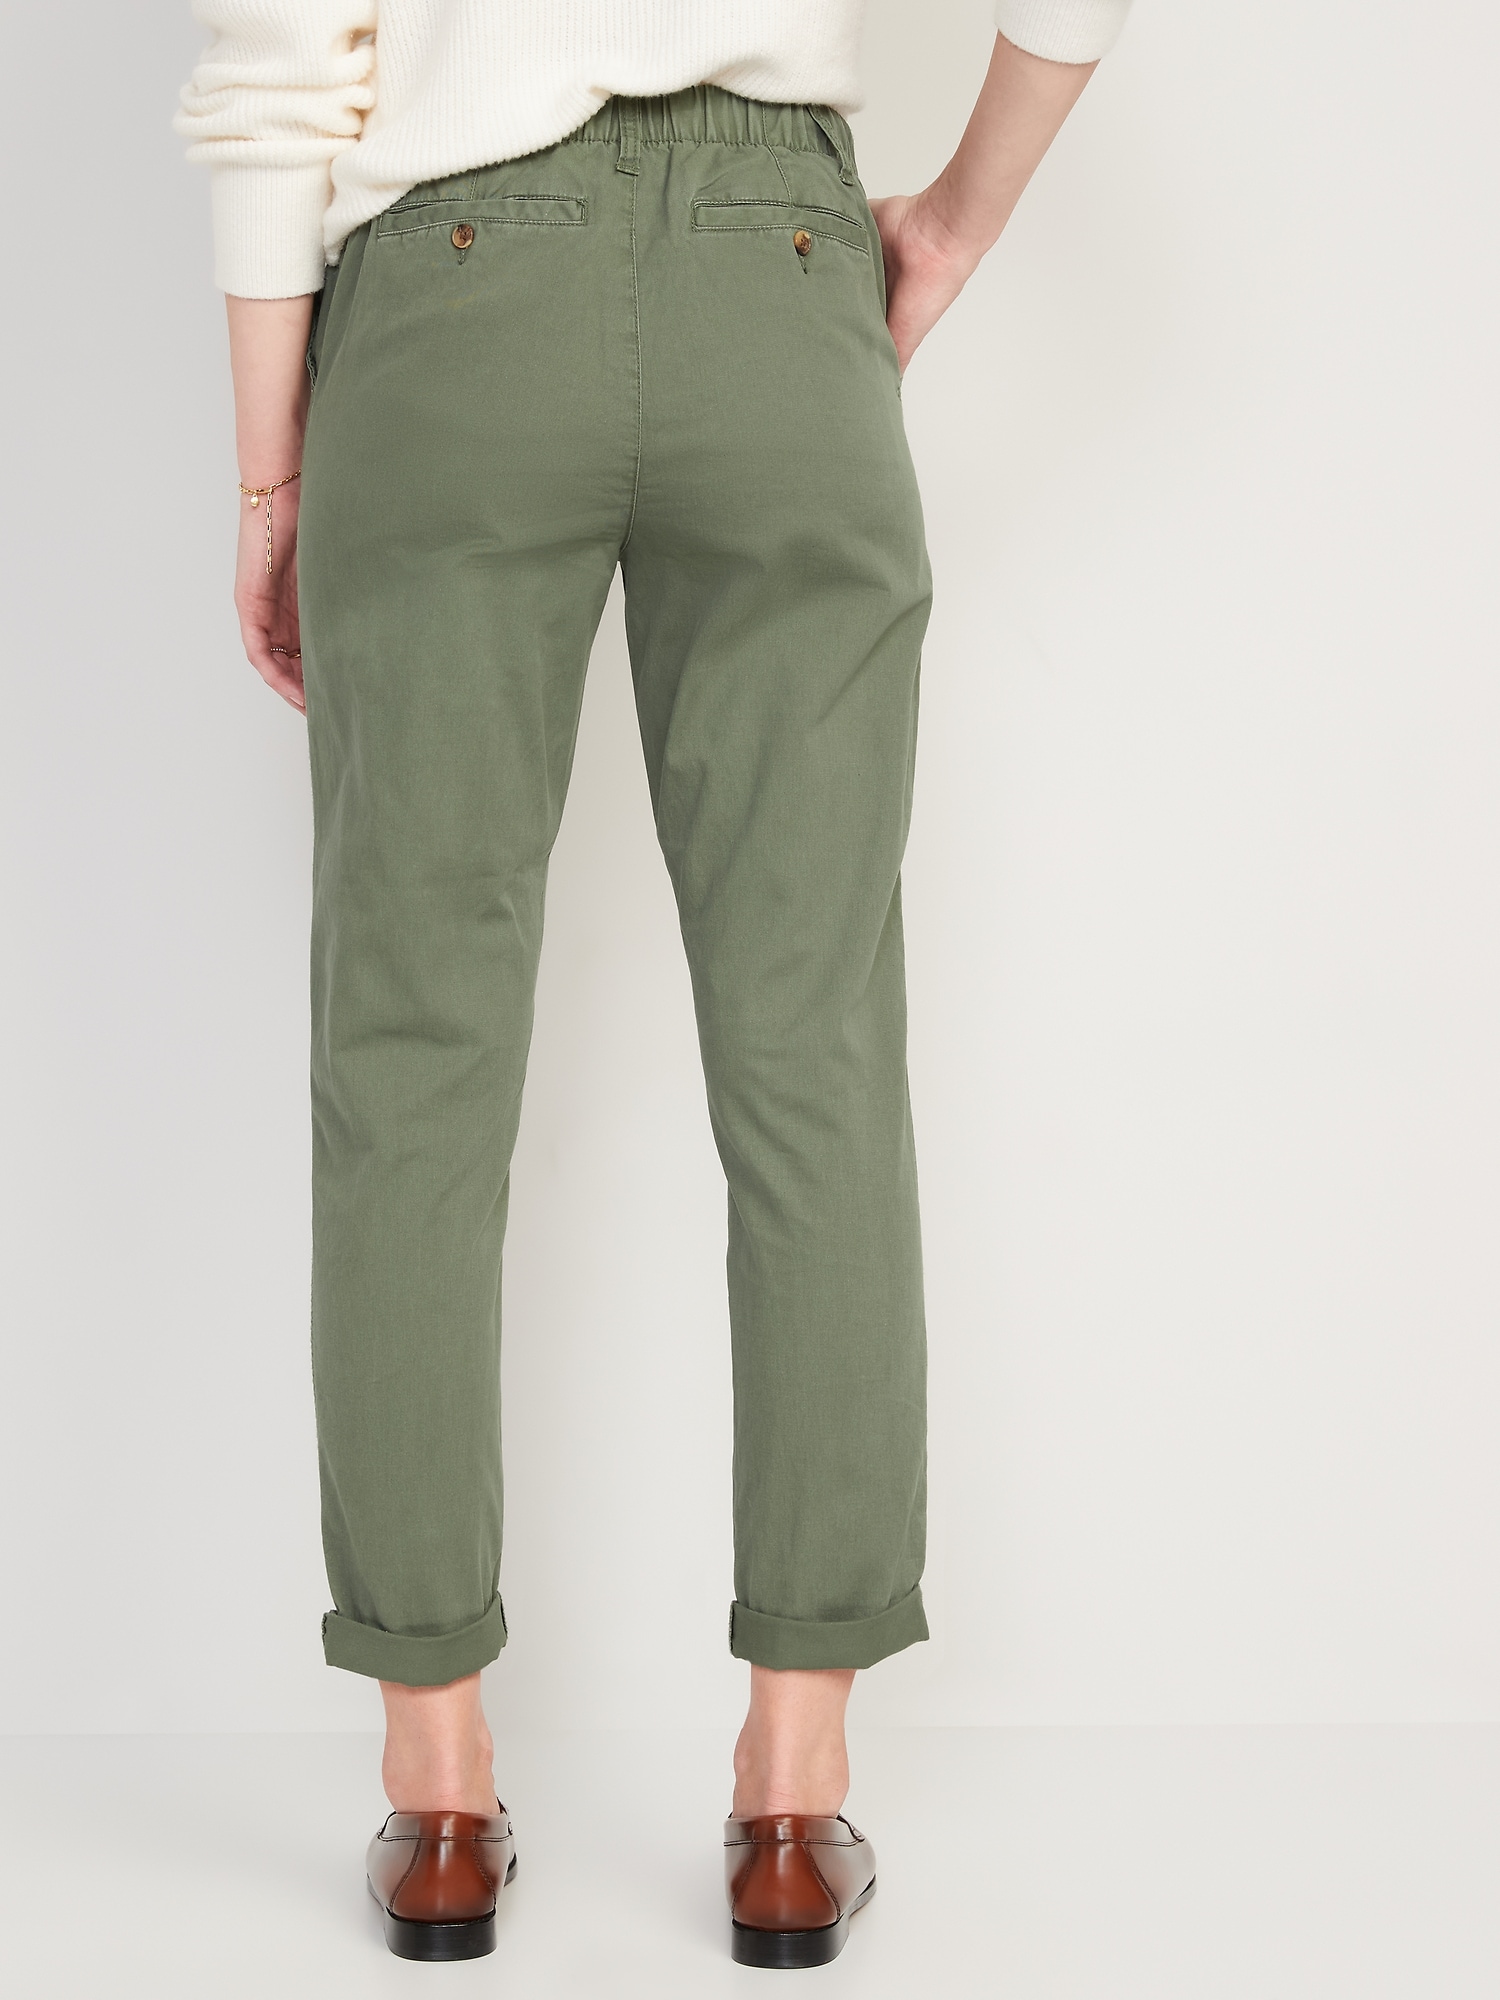 Women's High-Rise Slim Straight Fit Ankle Chino Pants - A New Day